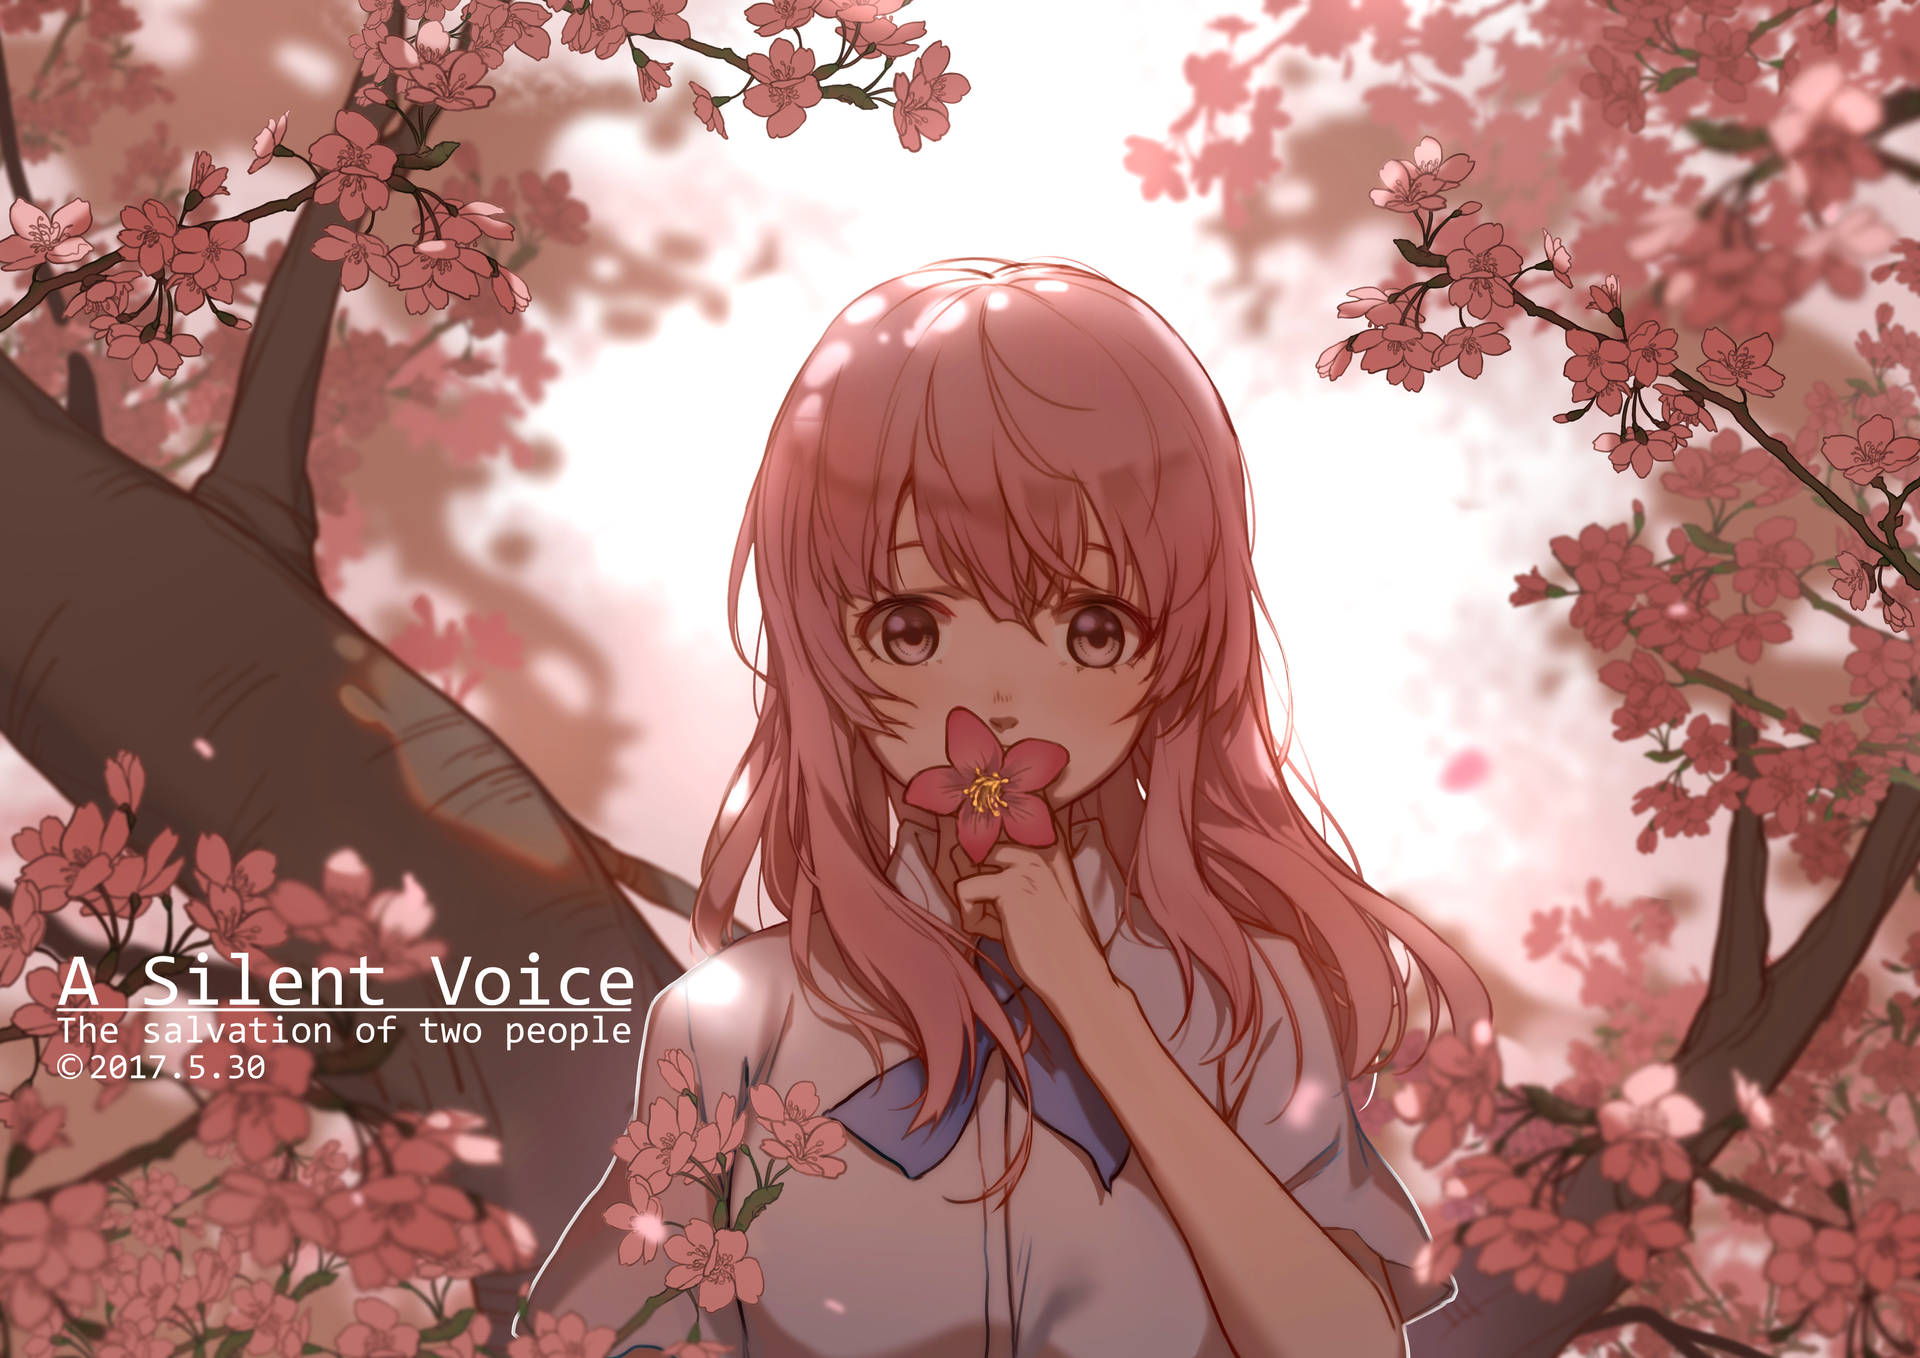 A Silent Voice - Shouko in a field of pink flowers Wallpaper